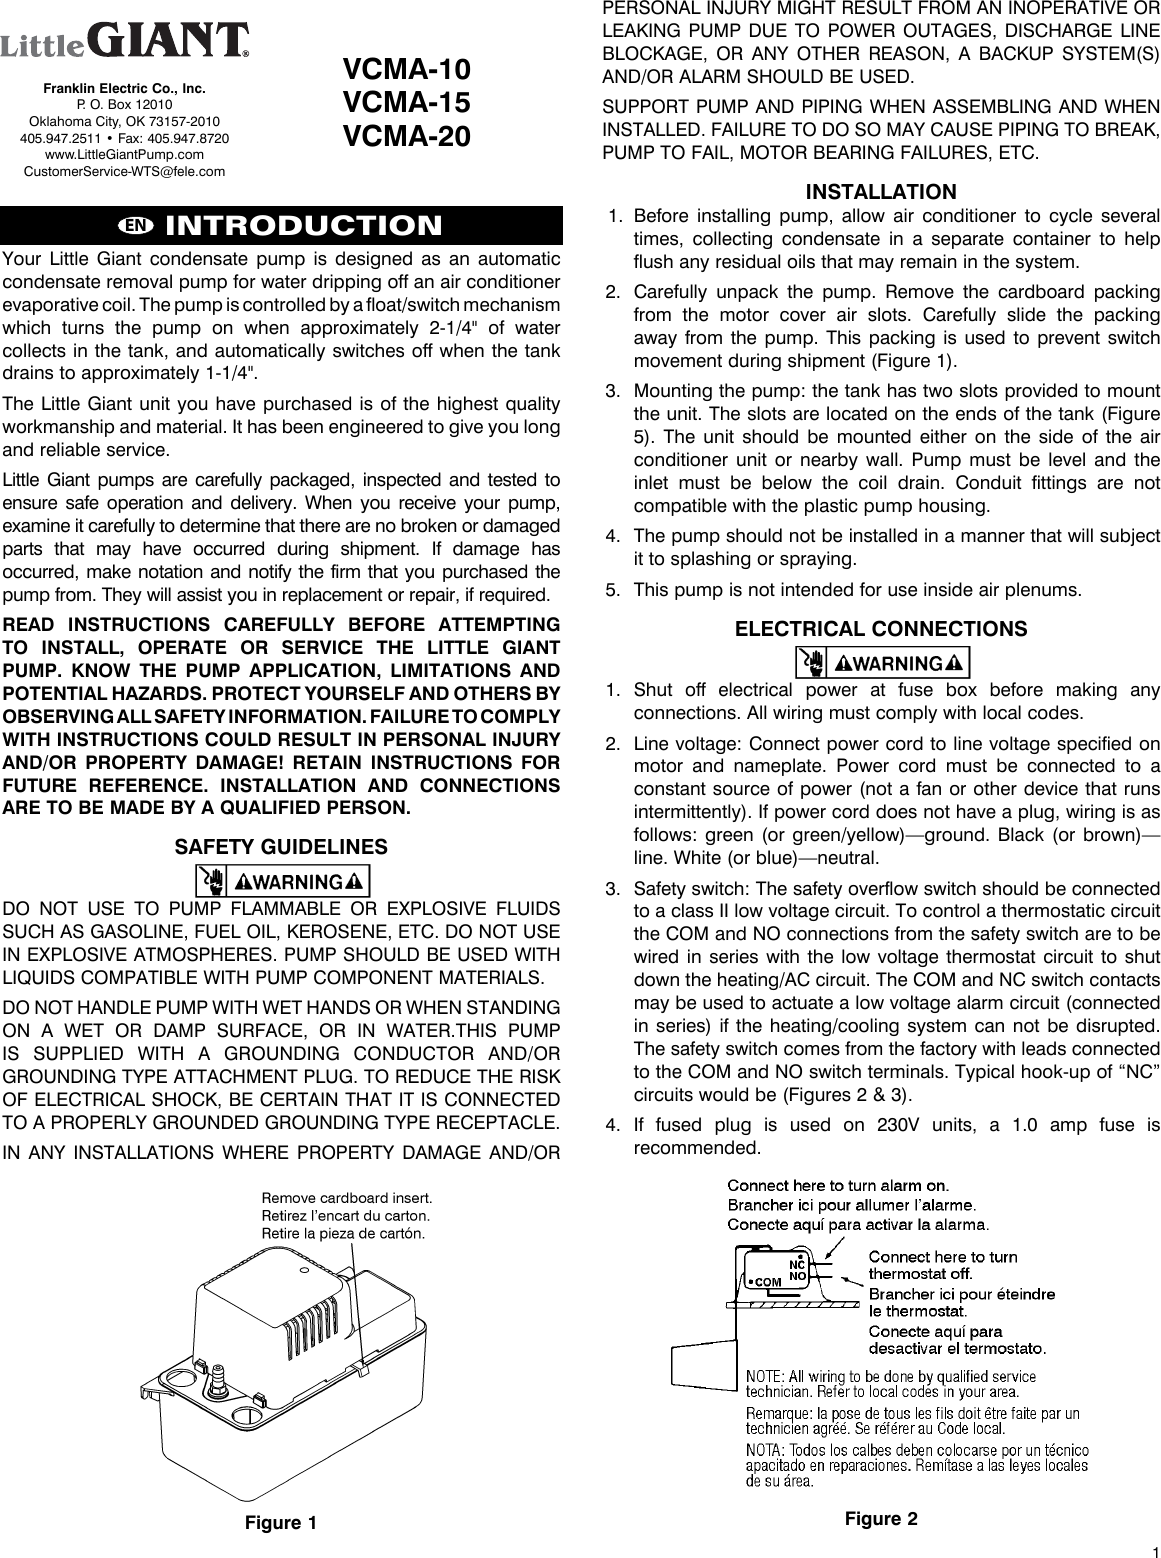 Page 1 of 8 - 18015 1 Little Giant Vcma-20 User Guide 998086 09-057 Manual